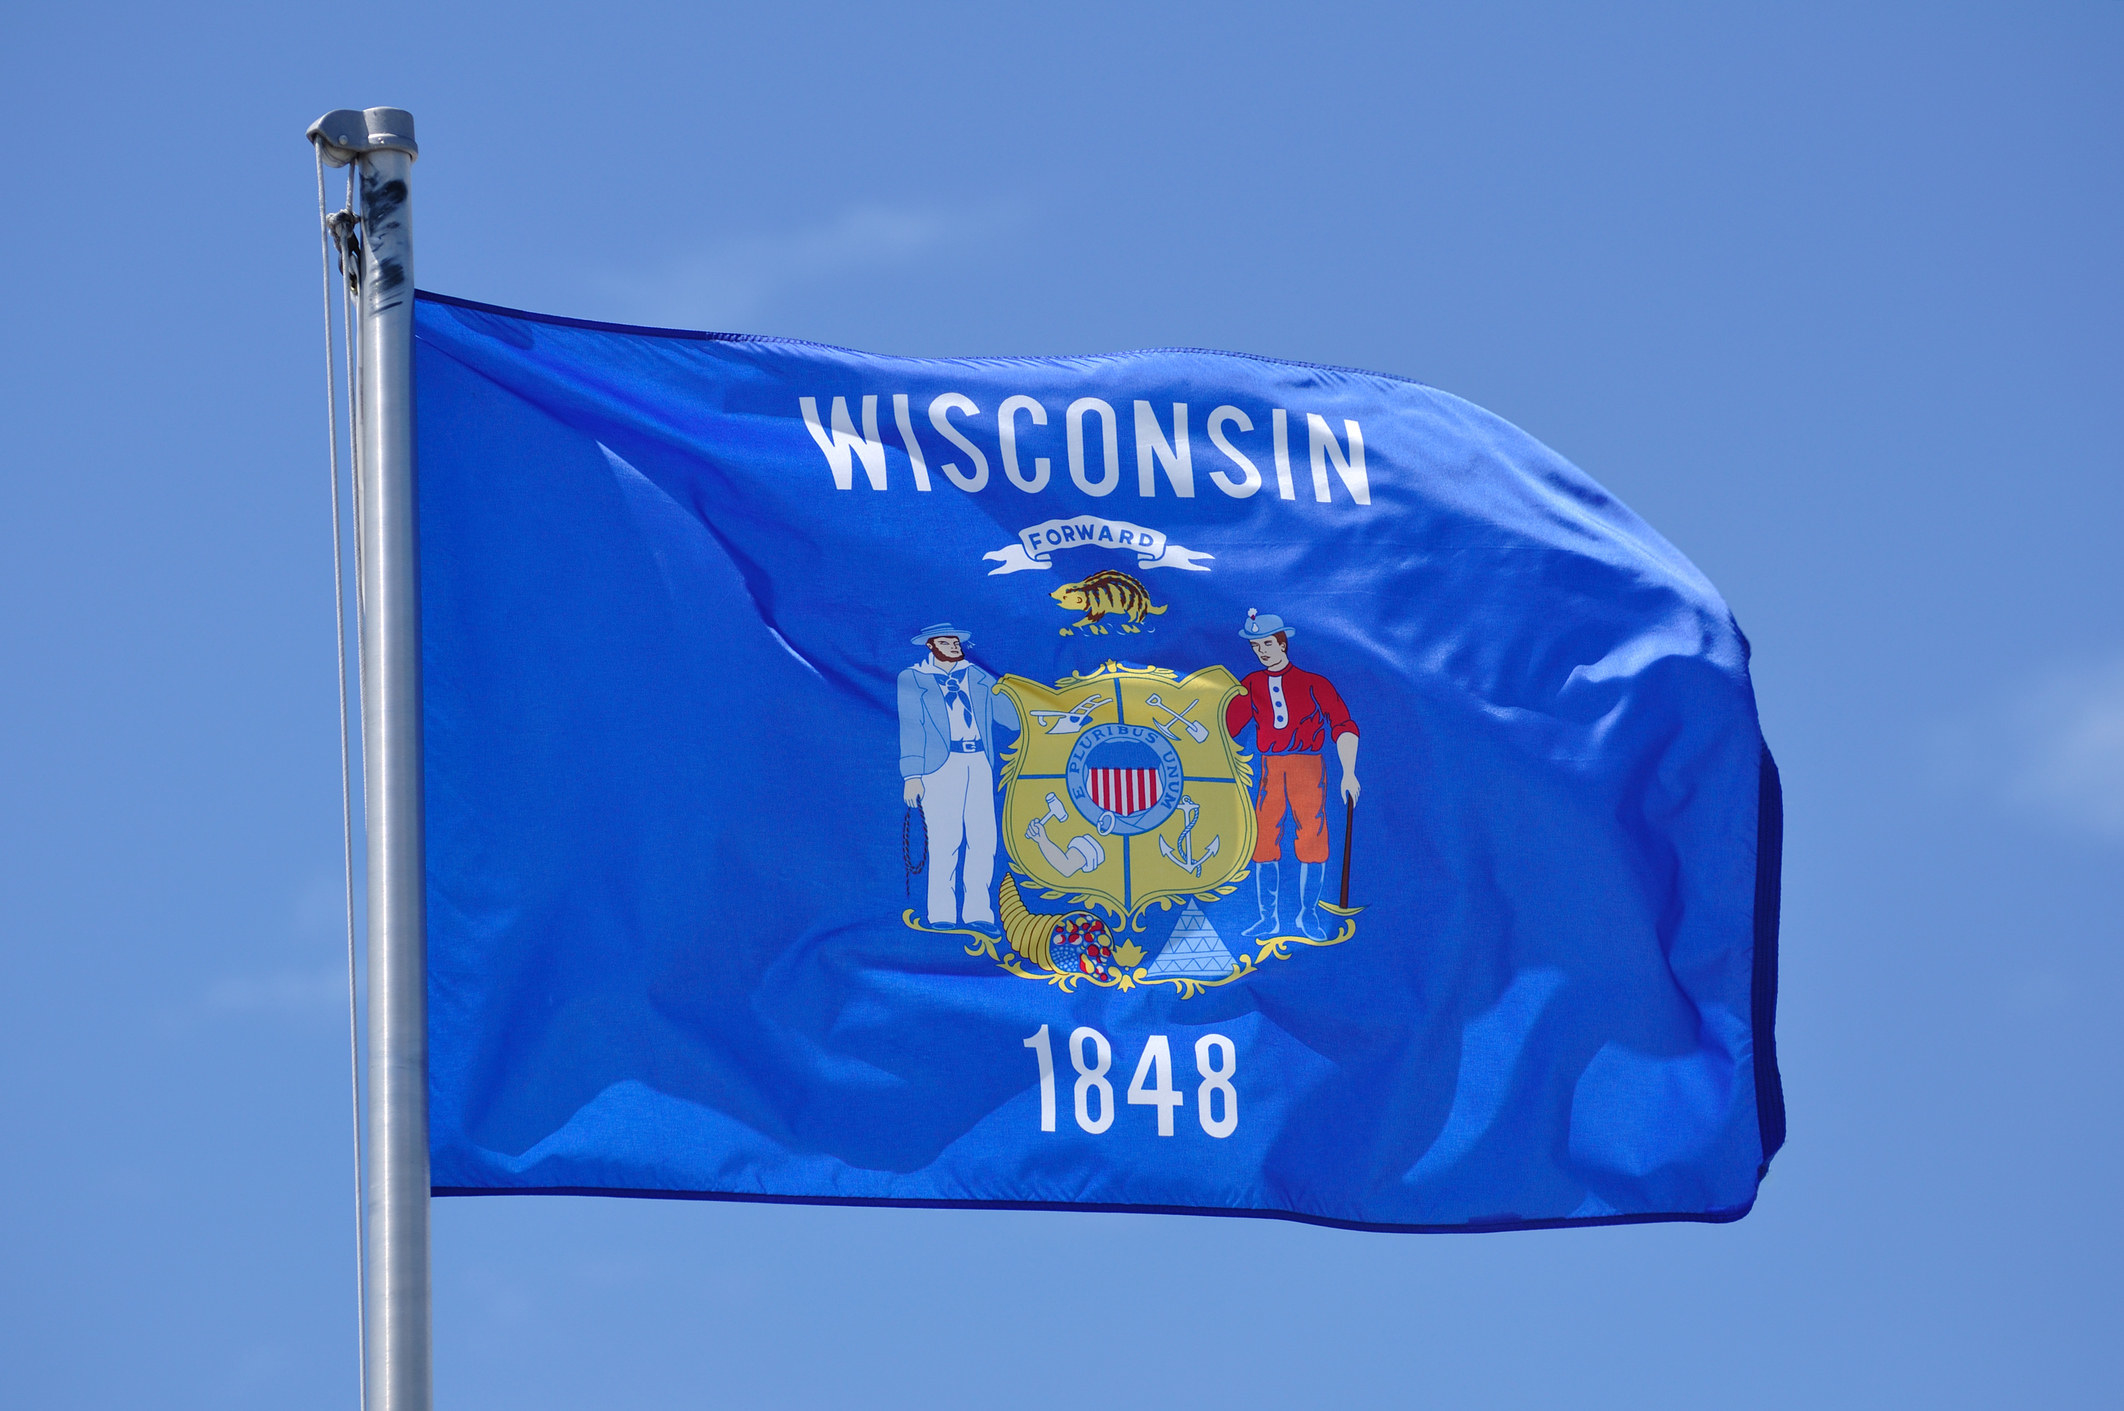  the Wisconsin state flag waving in the sky